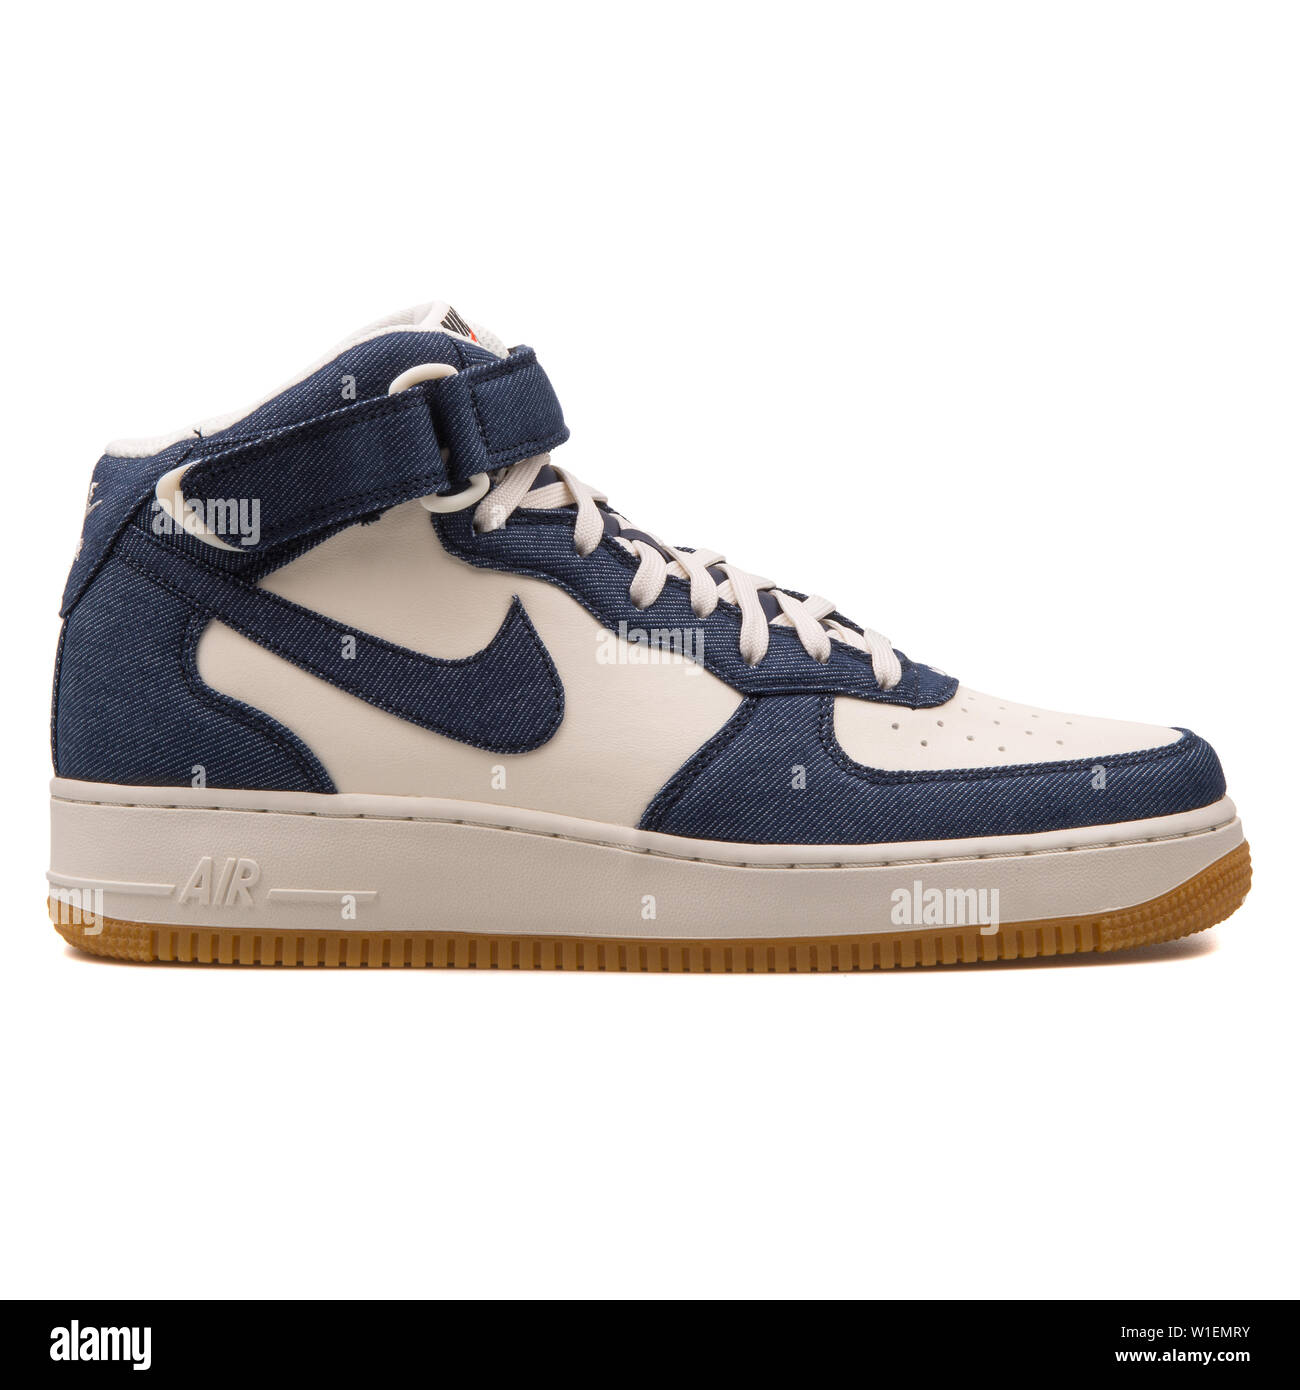 VIENNA, AUSTRIA - AUGUST 30, 2017: Nike Air Force 1 Mid 07 obsidian blue  and off white sneaker on white background Stock Photo - Alamy